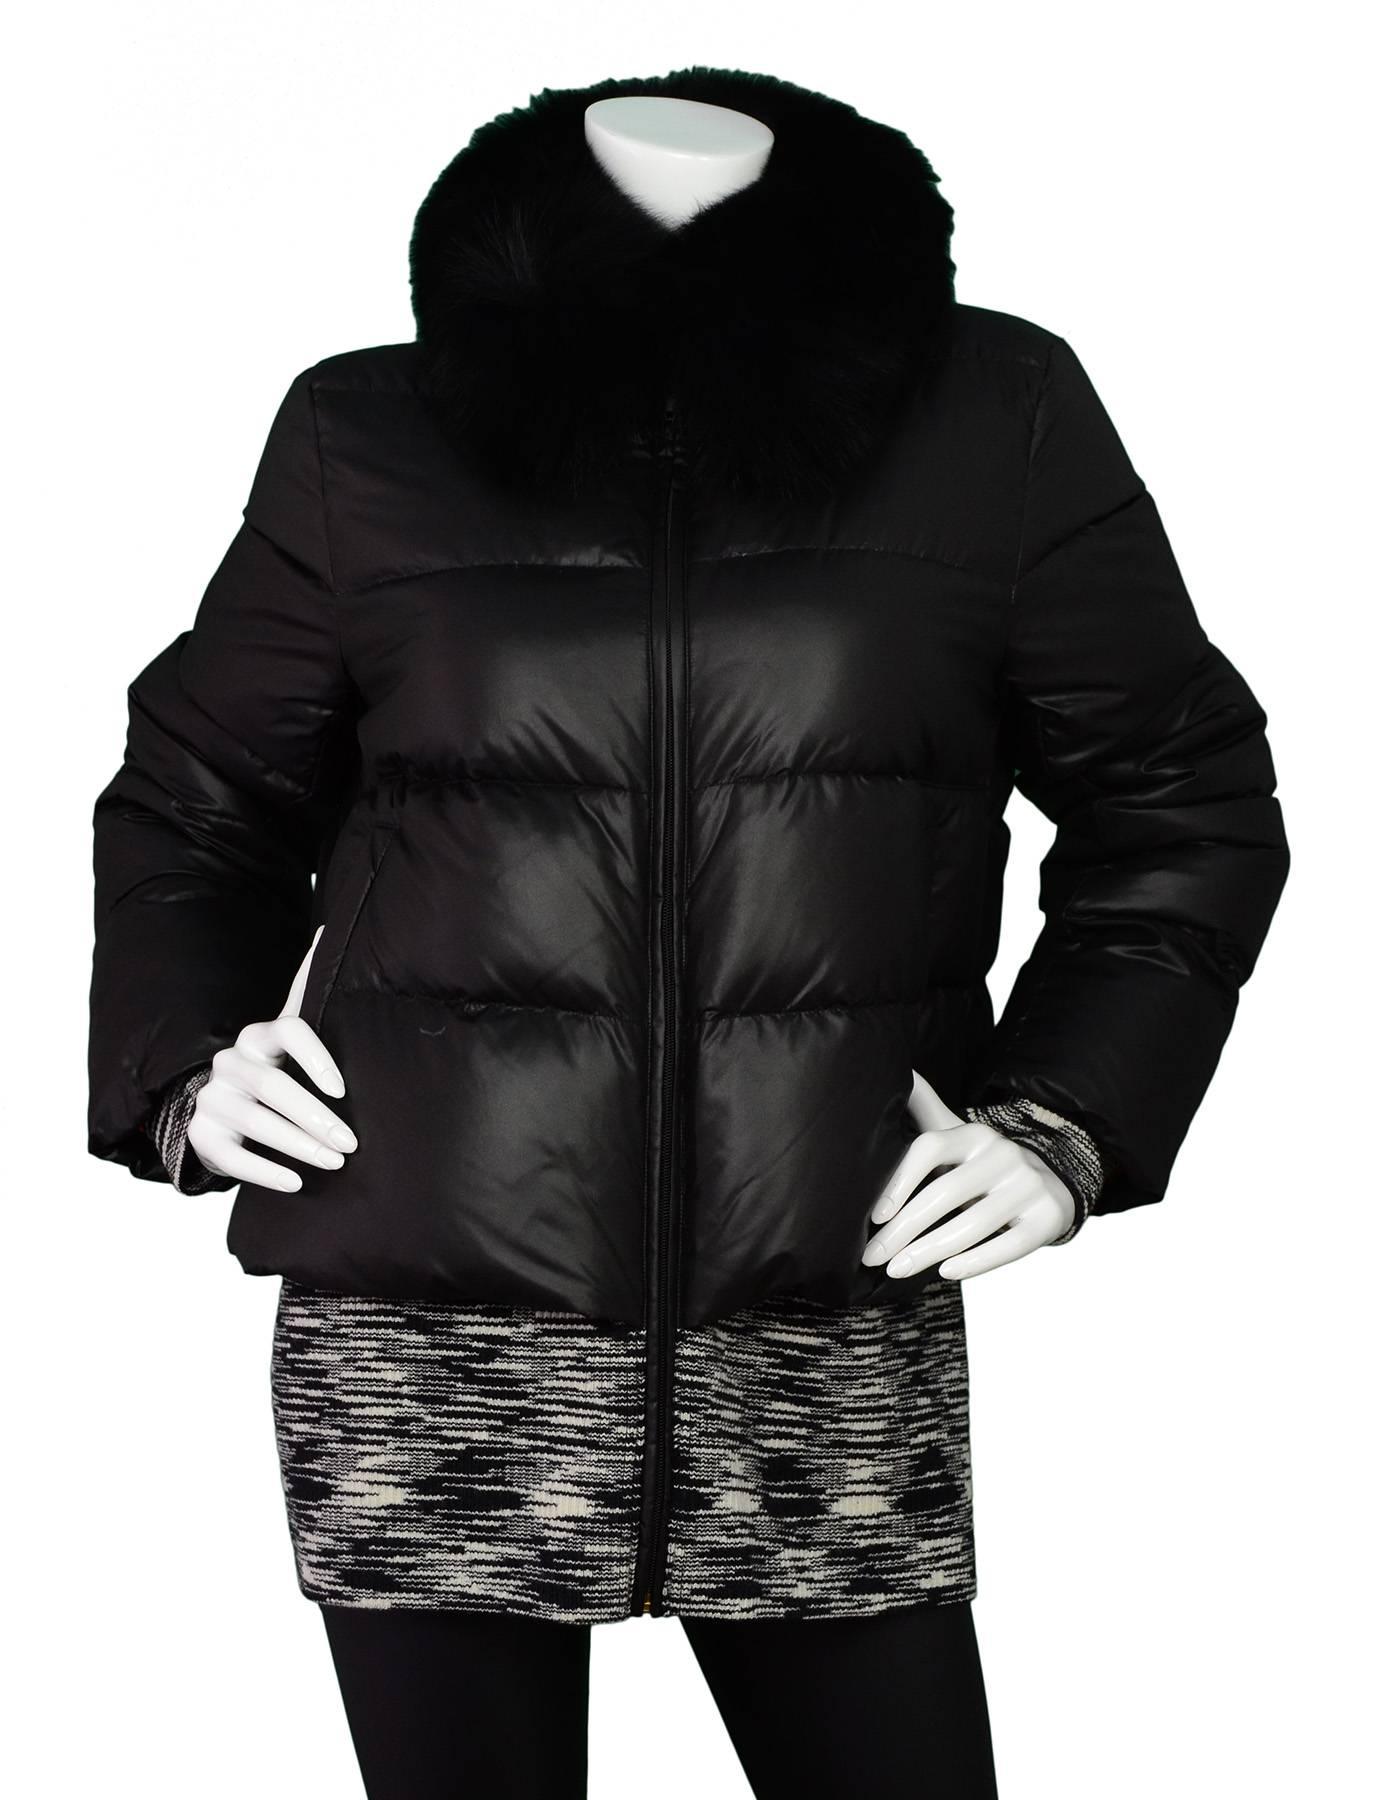 M Missoni Black Puffer Jacket with Fur Collar Sz IT46

Features knit hem

Made In: China
Color: Black
Composition: 100% Polyester
Lining: Multicolor print nylon
Closure/Opening: Zip up front
Exterior Pockets: Side hip pockets
Overall Condition: